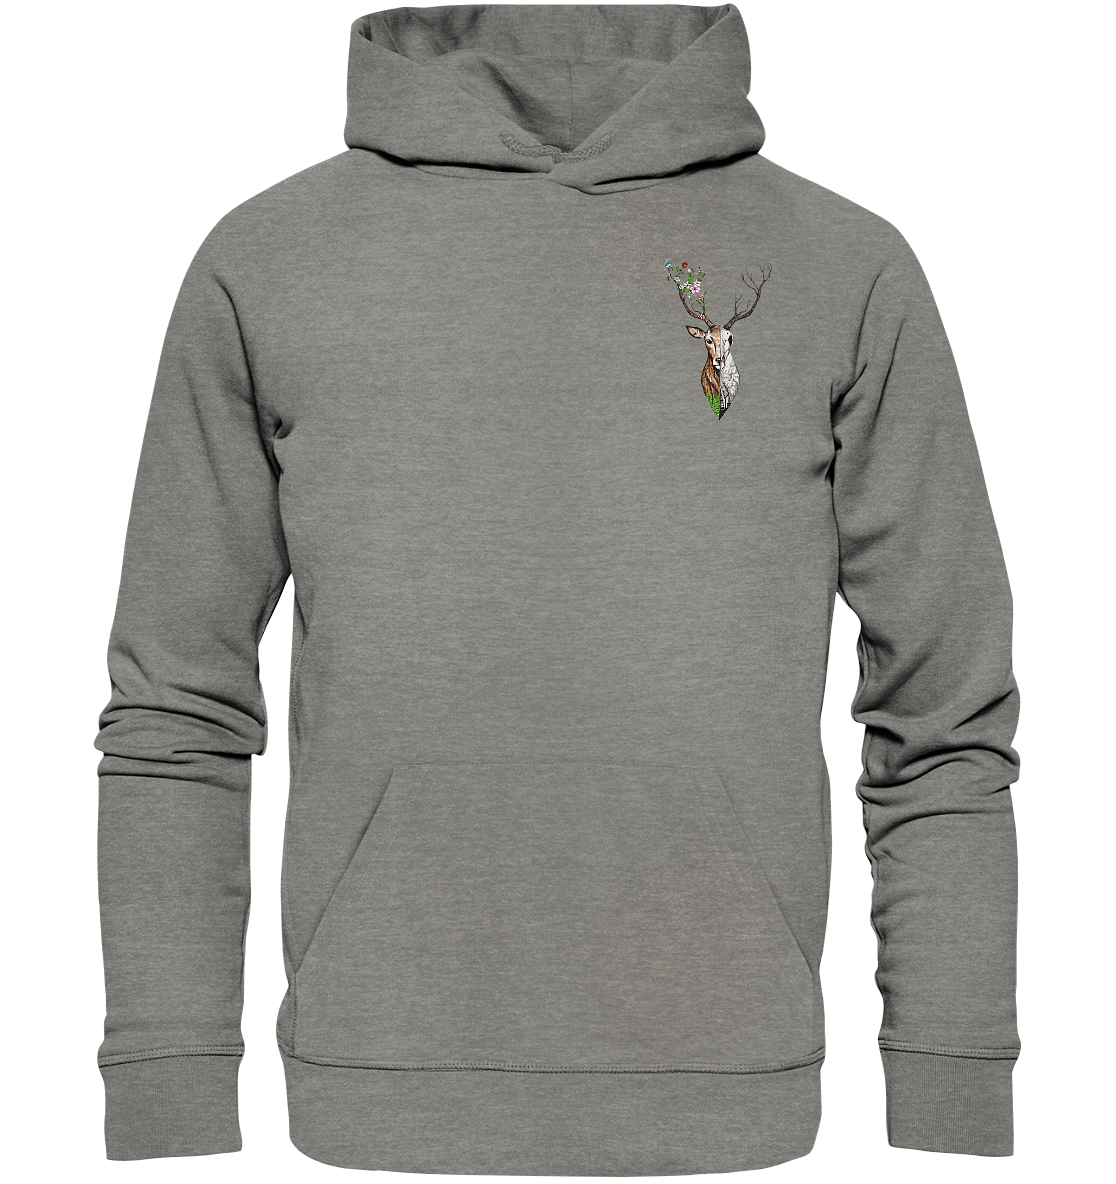 front-organic-hoodie-818381-1116x-1.png